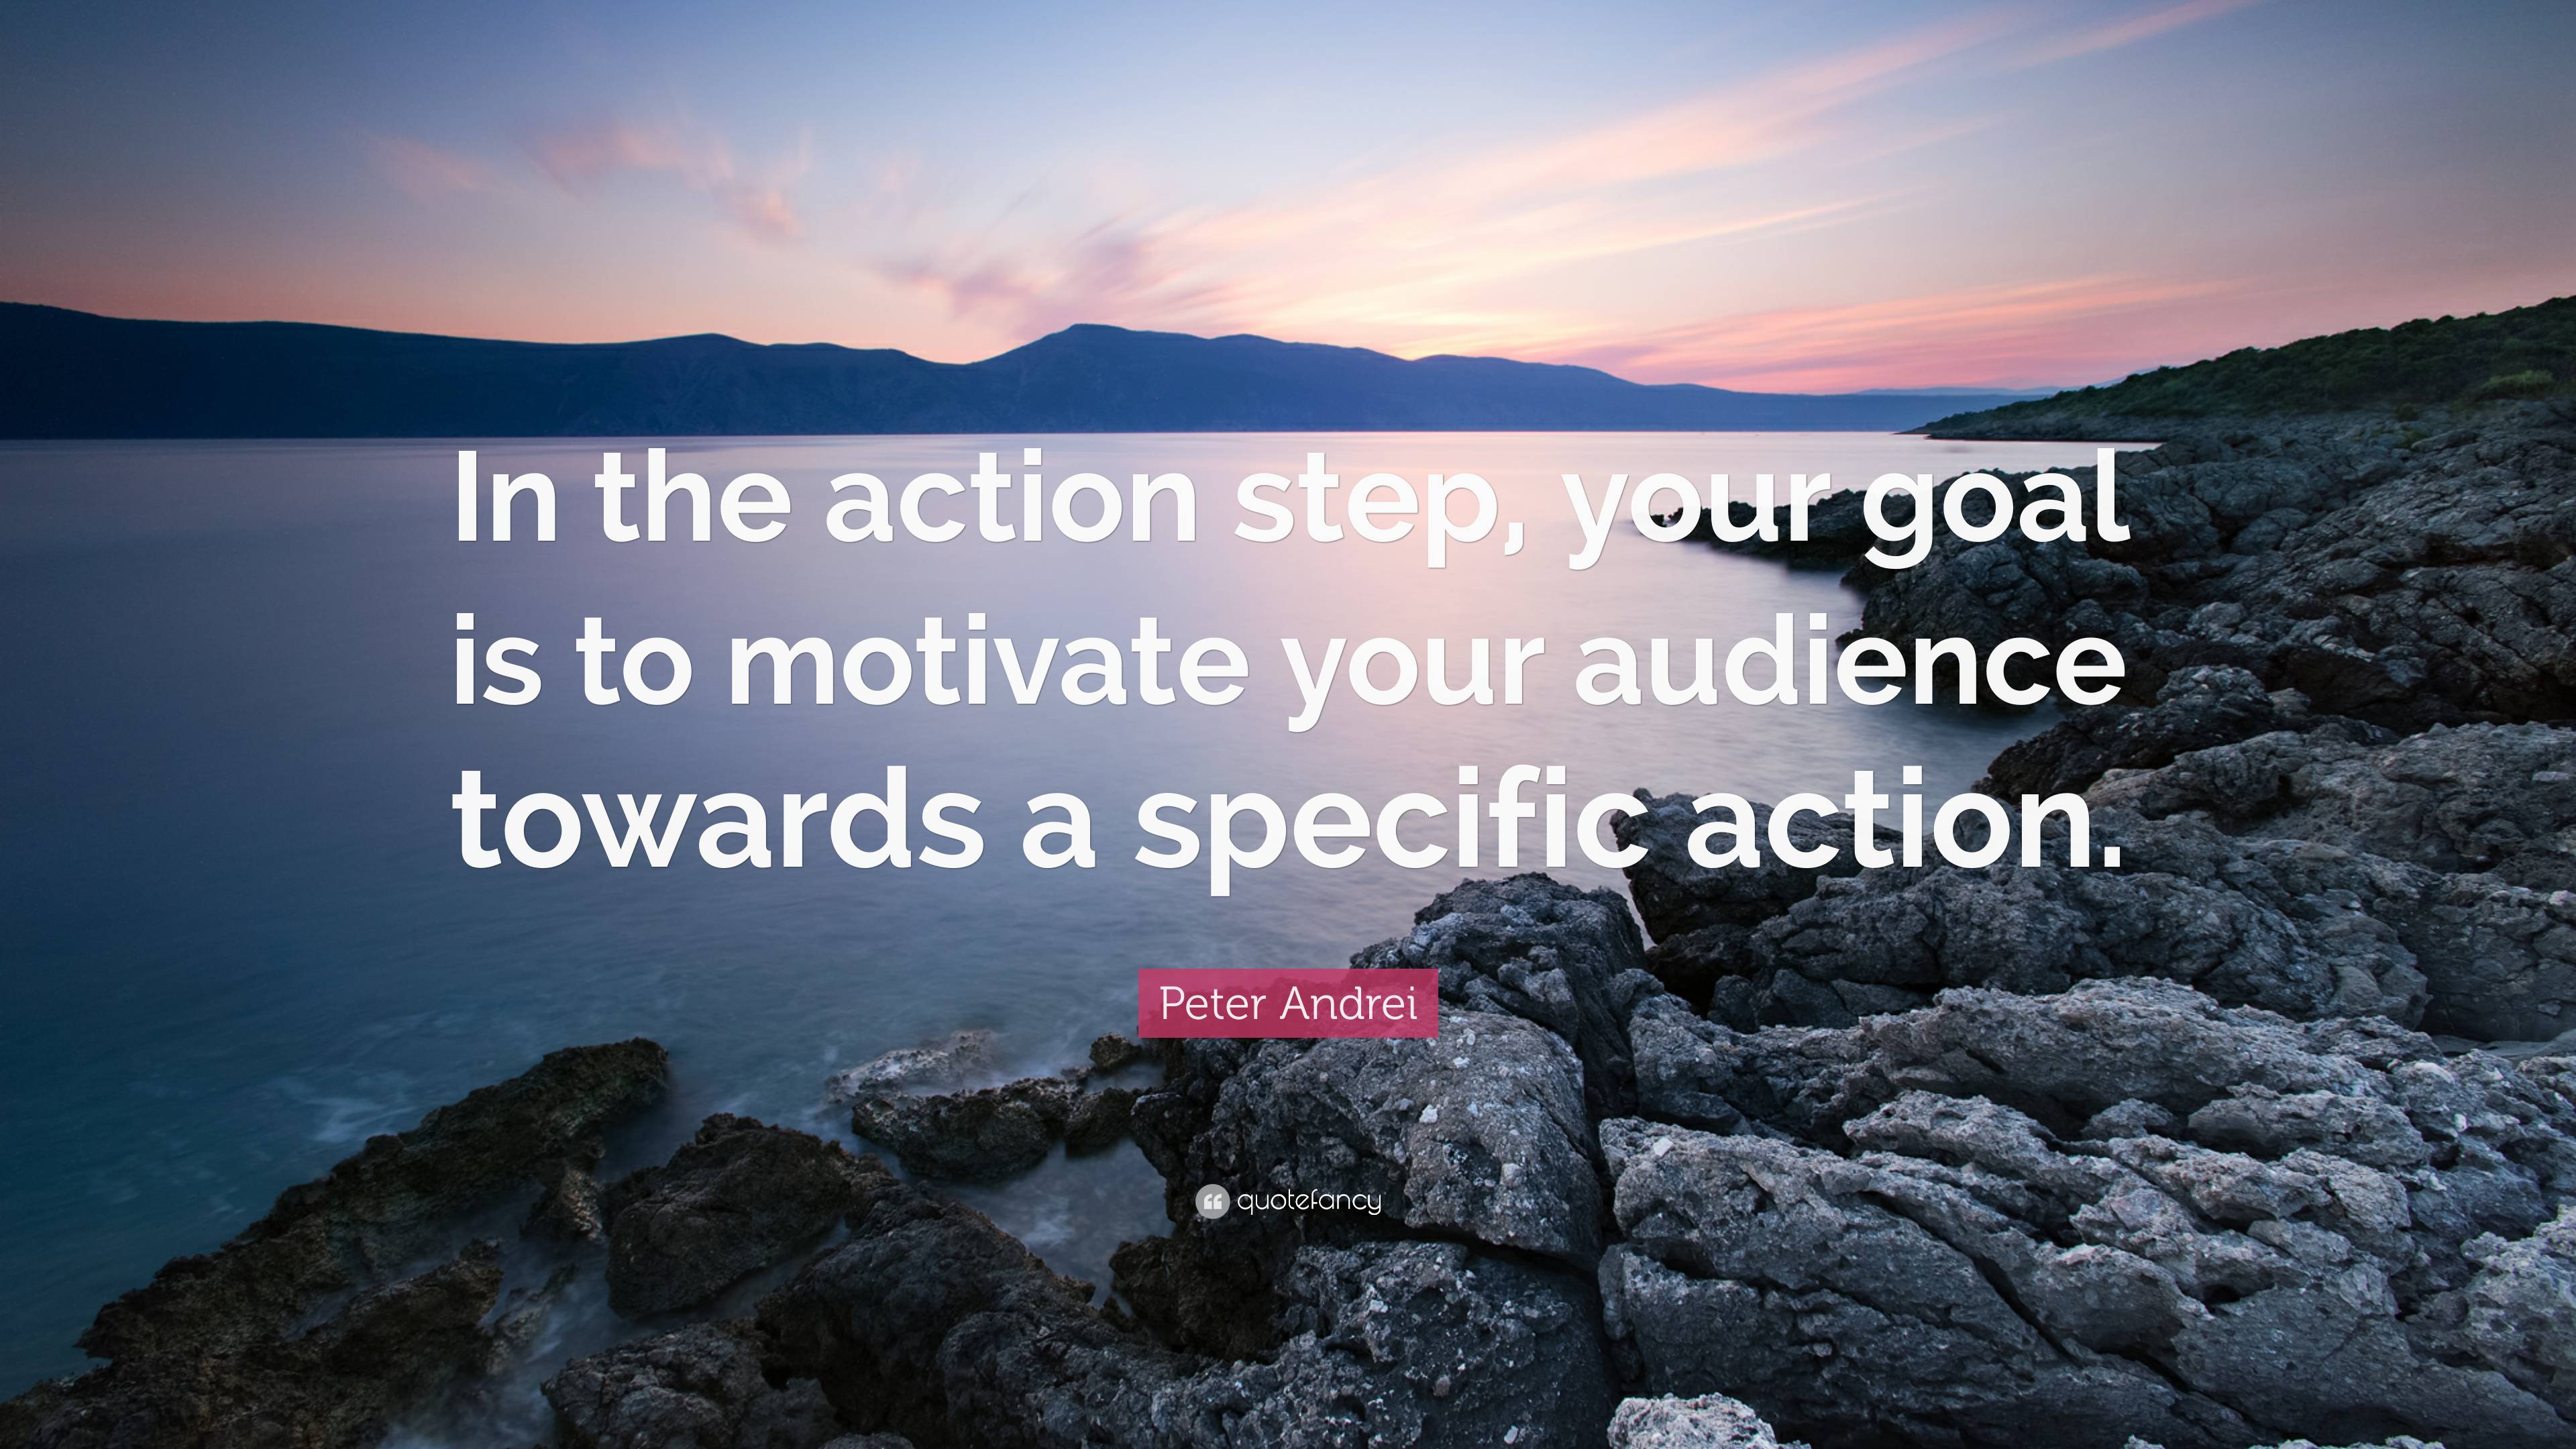 Peter Andrei Quote: “In the action step, your goal is to motivate your ...